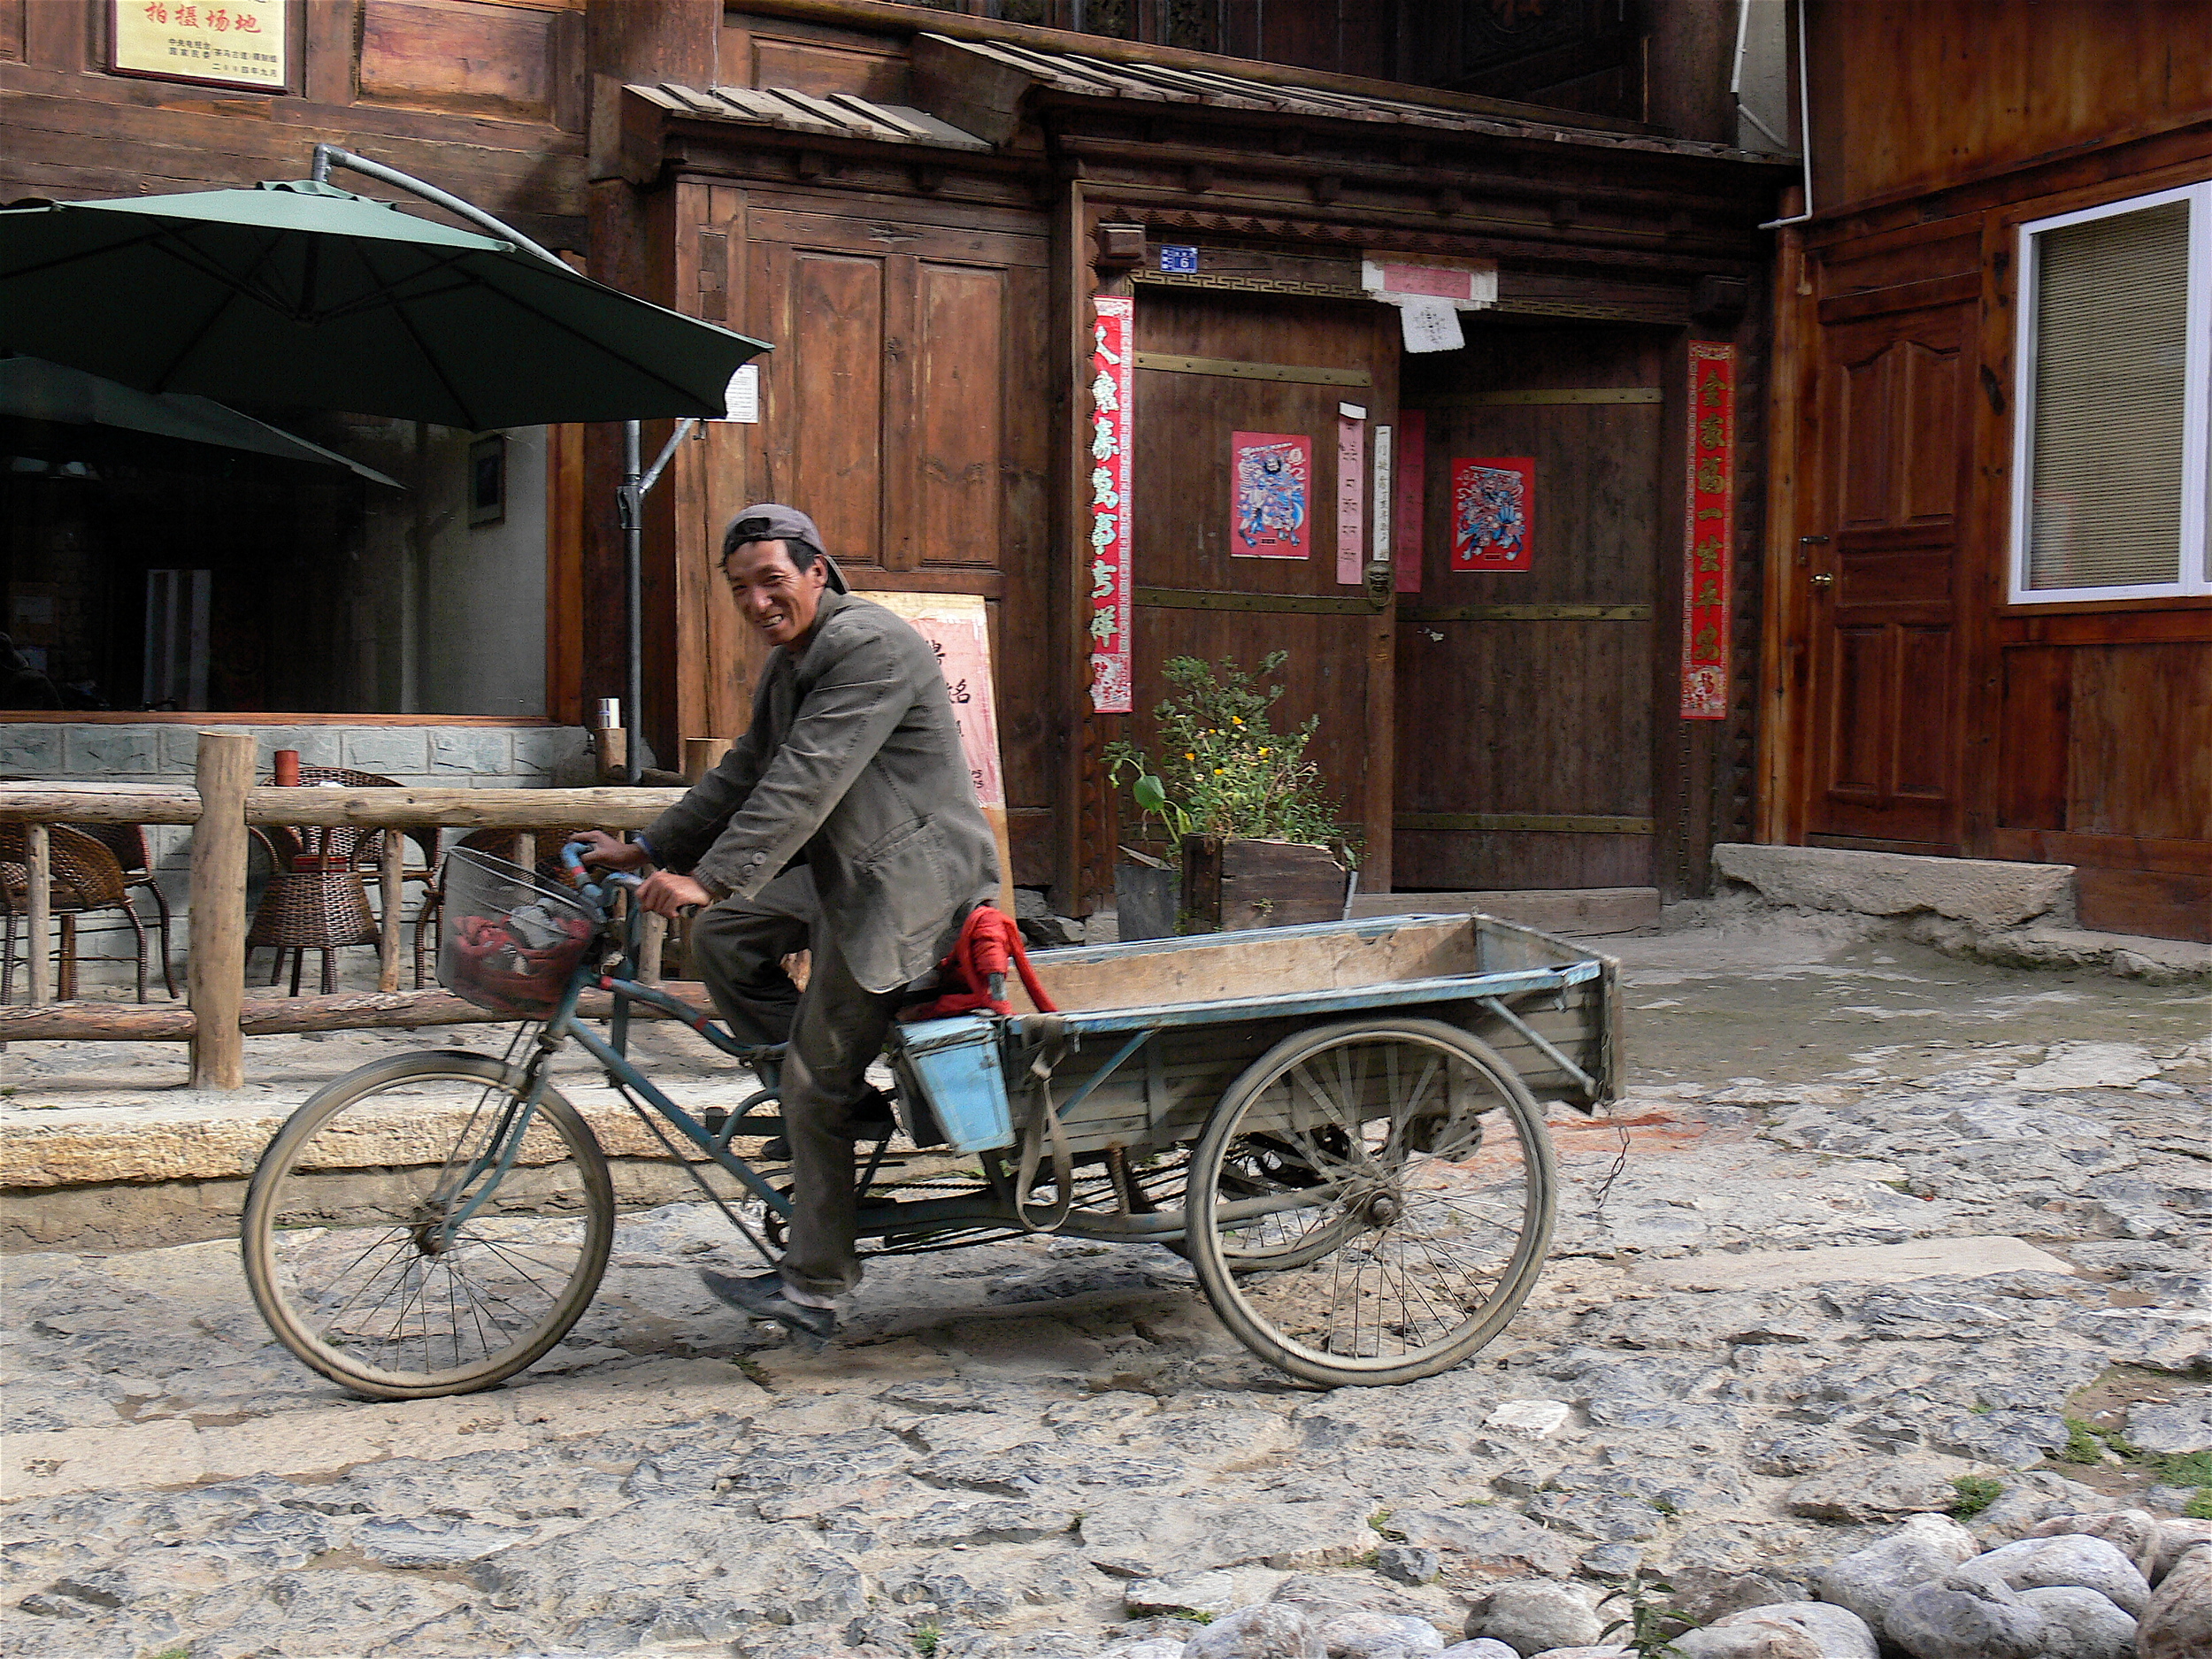  Fellow cyclist in Shangrila , China 